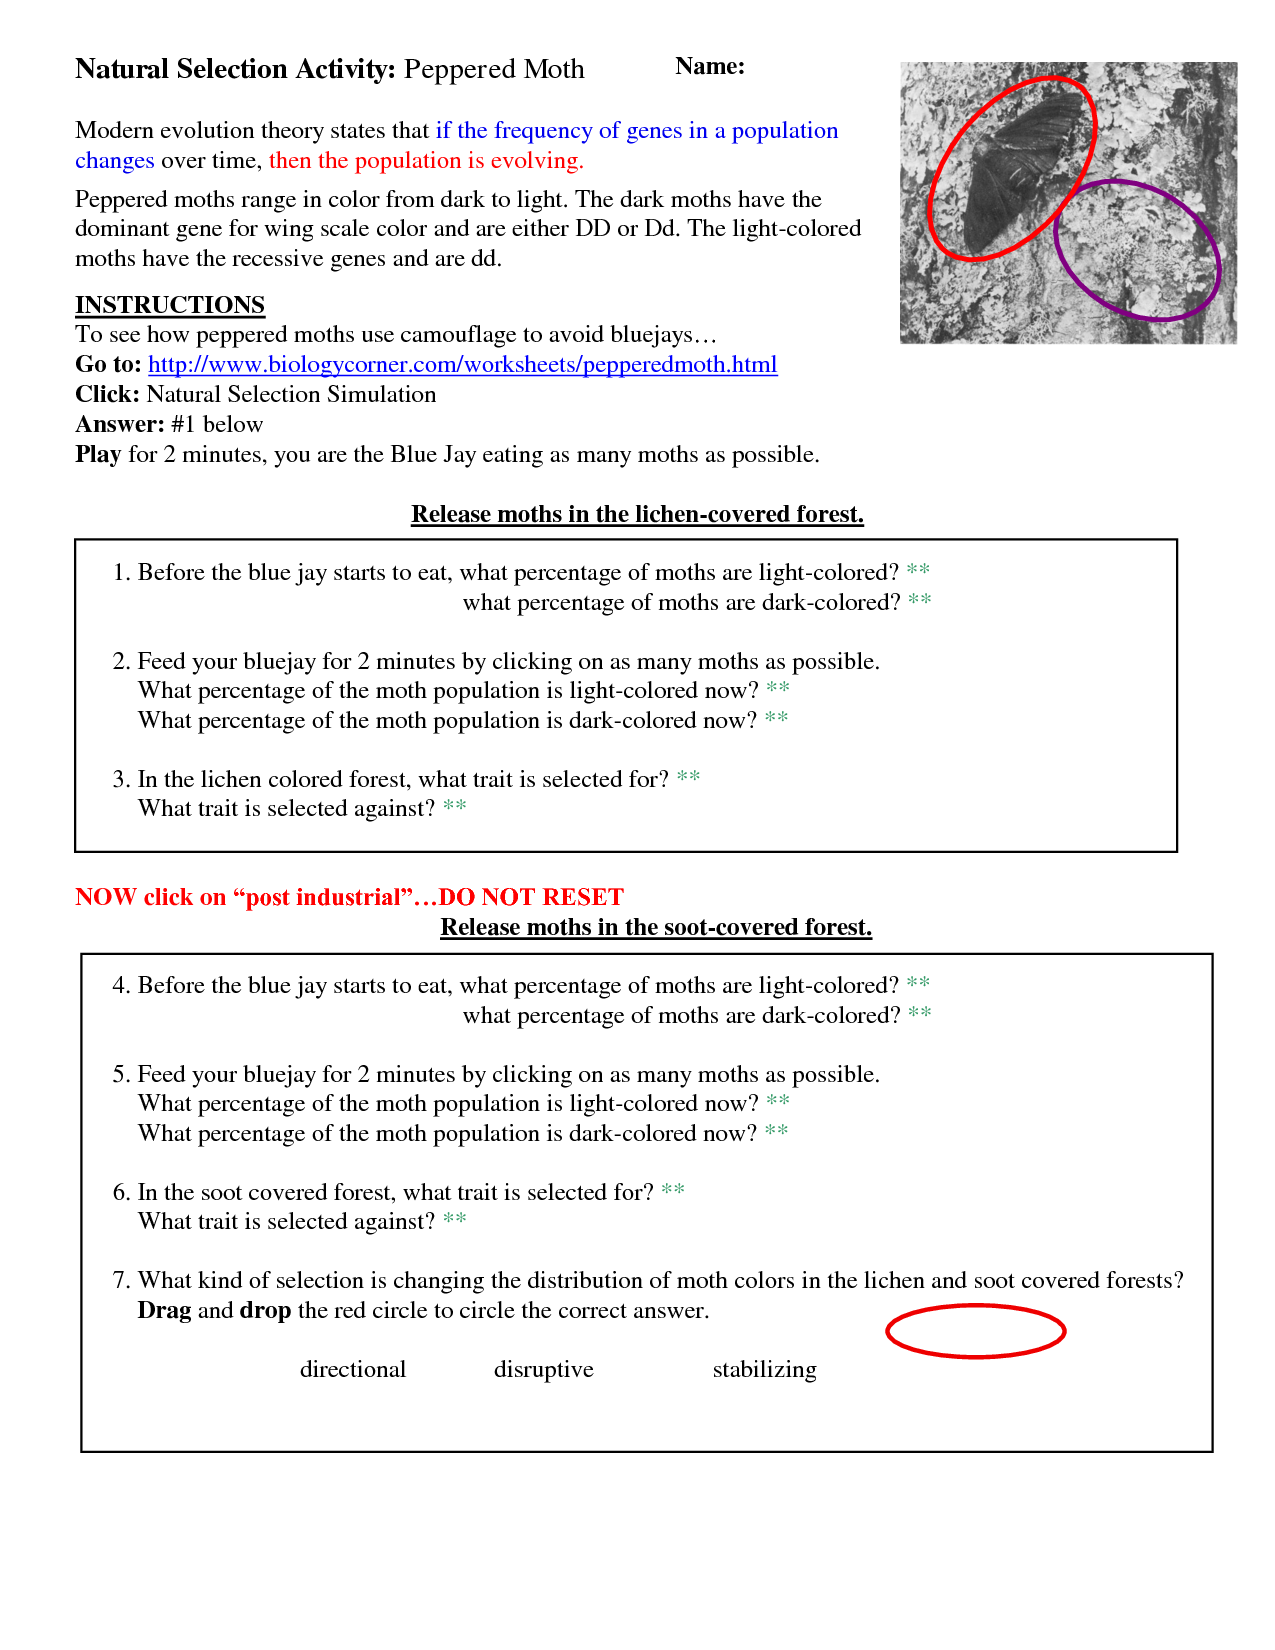 evidence-of-evolution-worksheet-answer-key-pdf-waltery-learning-solution-for-student